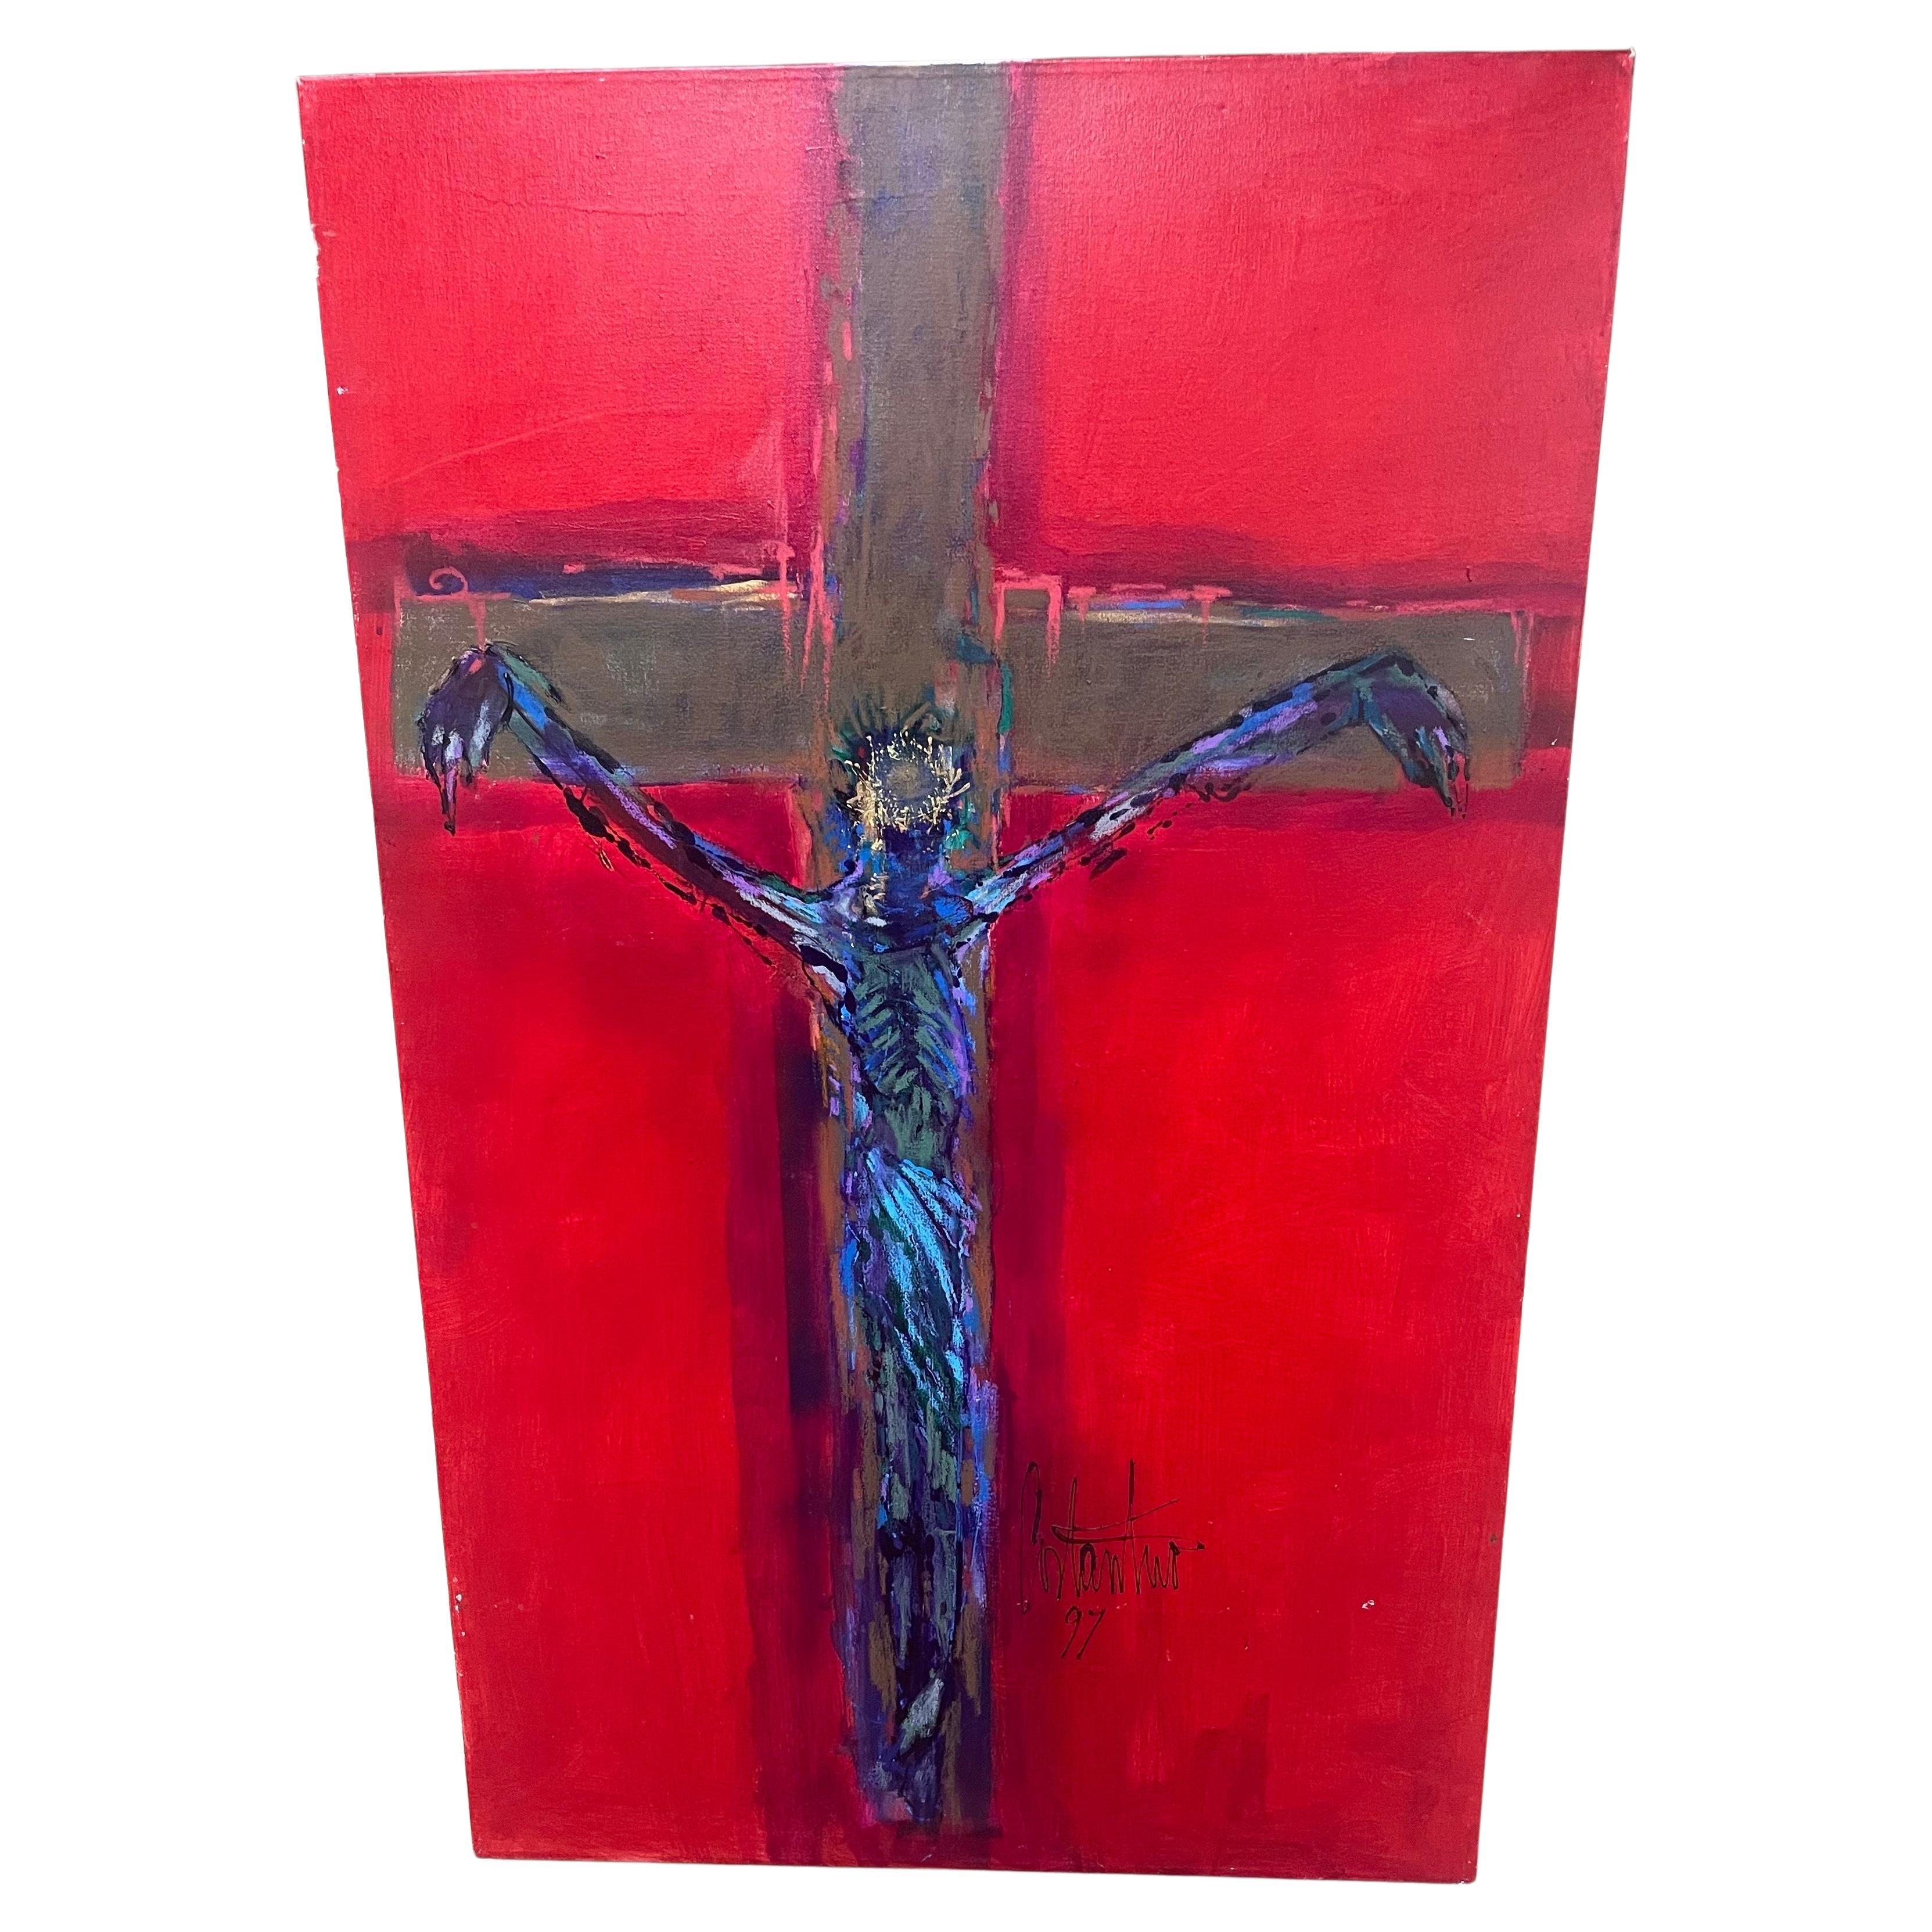 A large original oil on canvas abstract painting of Jesus Christ on the cross by Ralph Costantino, circa 1997. The painting is in very good vintage condition and measures 30